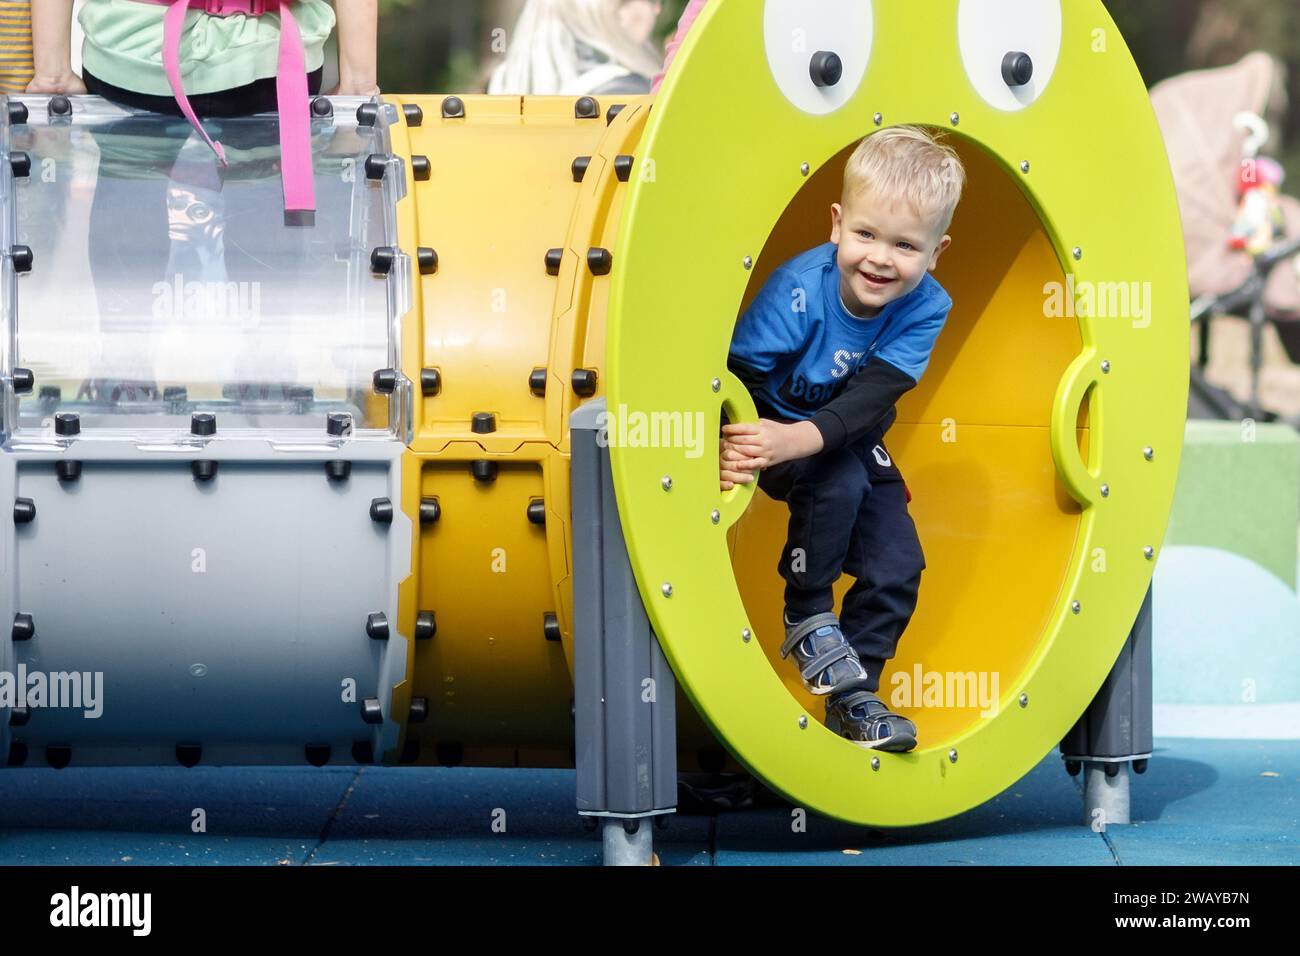 A cheerful boy in a blue blazer is playing active sports games in a yellow pipe obstacle course on the playground. Stock Photo